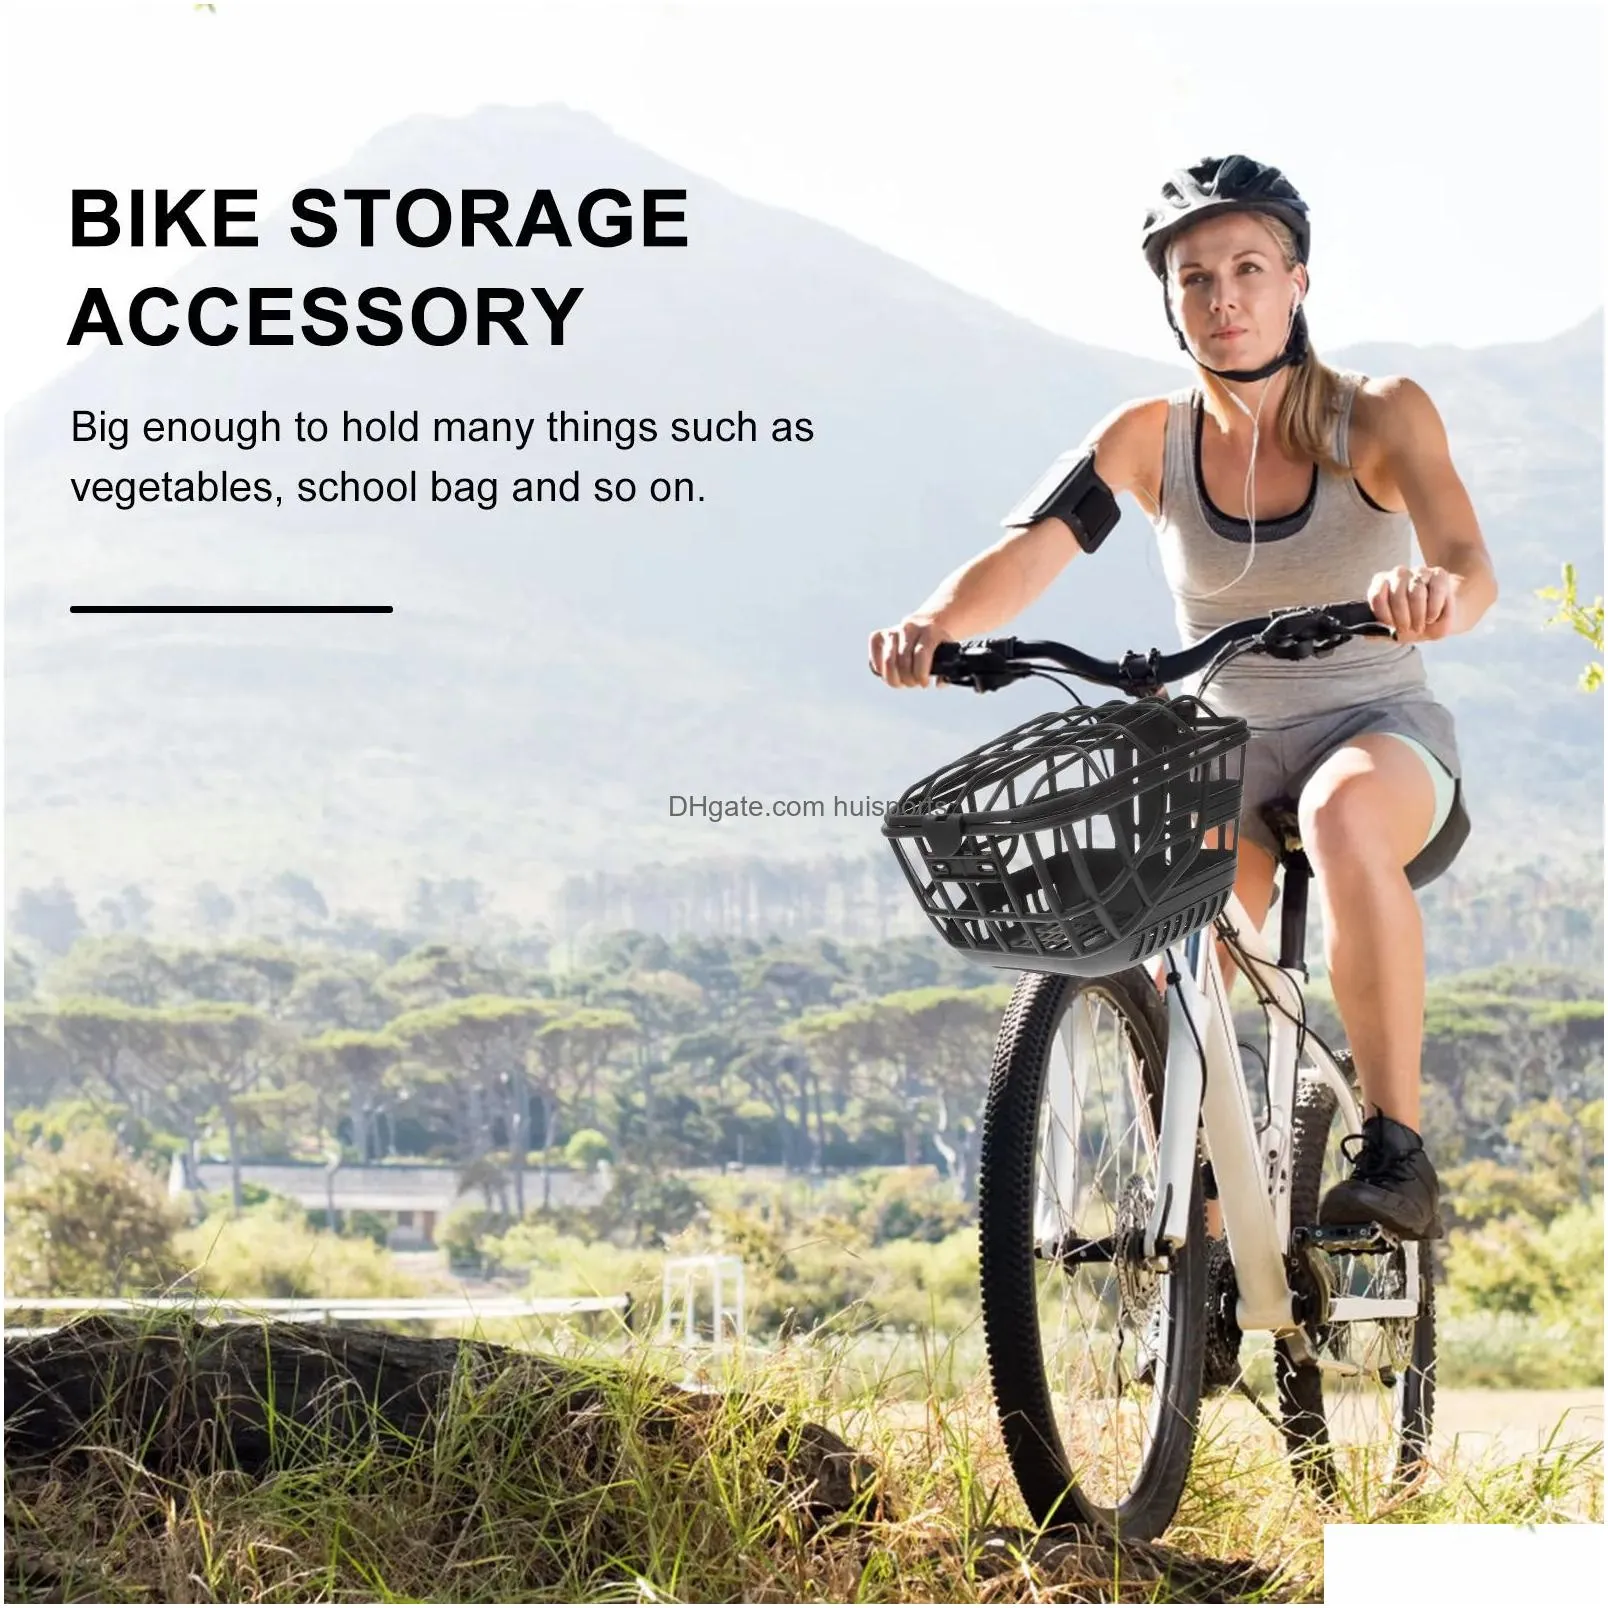 panniers bags bike basket storage accessory parts baskets women girls dogs cruisers front wicker holder cycling riding 230928